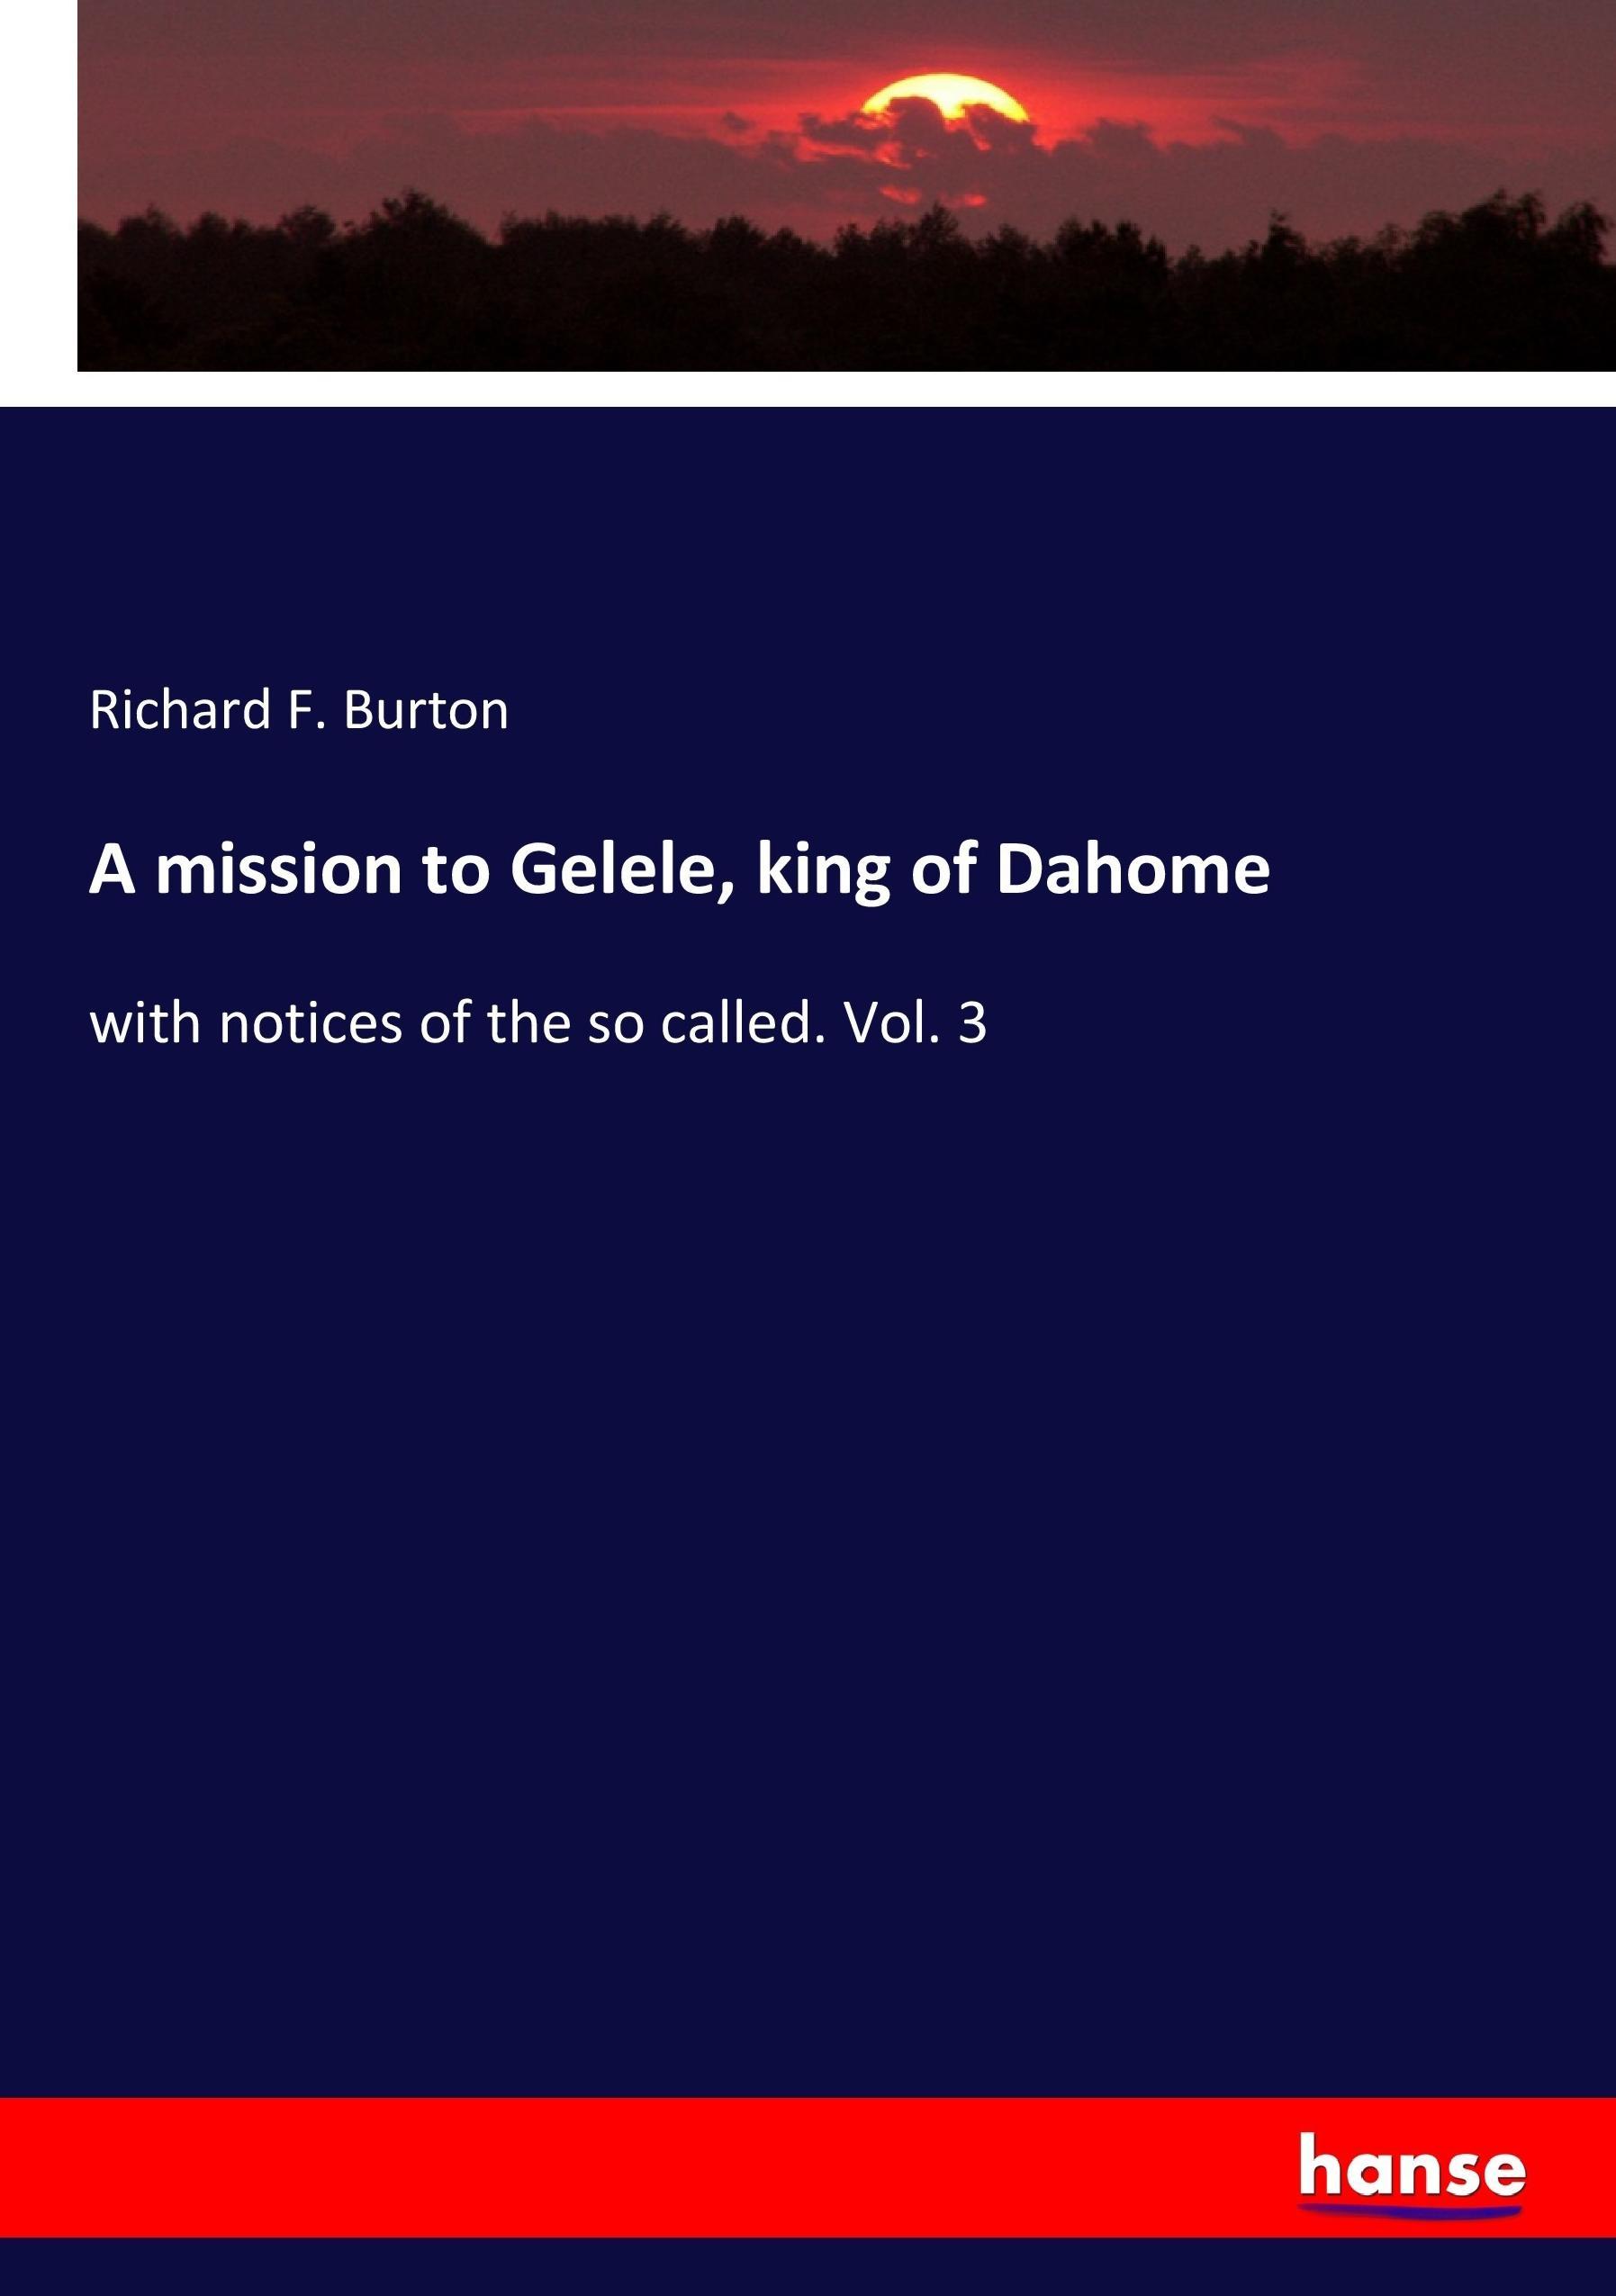 A mission to Gelele, king of Dahome | with notices of the so called. Vol. 3 | Richard F. Burton | Taschenbuch | Paperback | 288 S. | Englisch | 2017 | hansebooks | EAN 9783744736831 - Burton, Richard F.